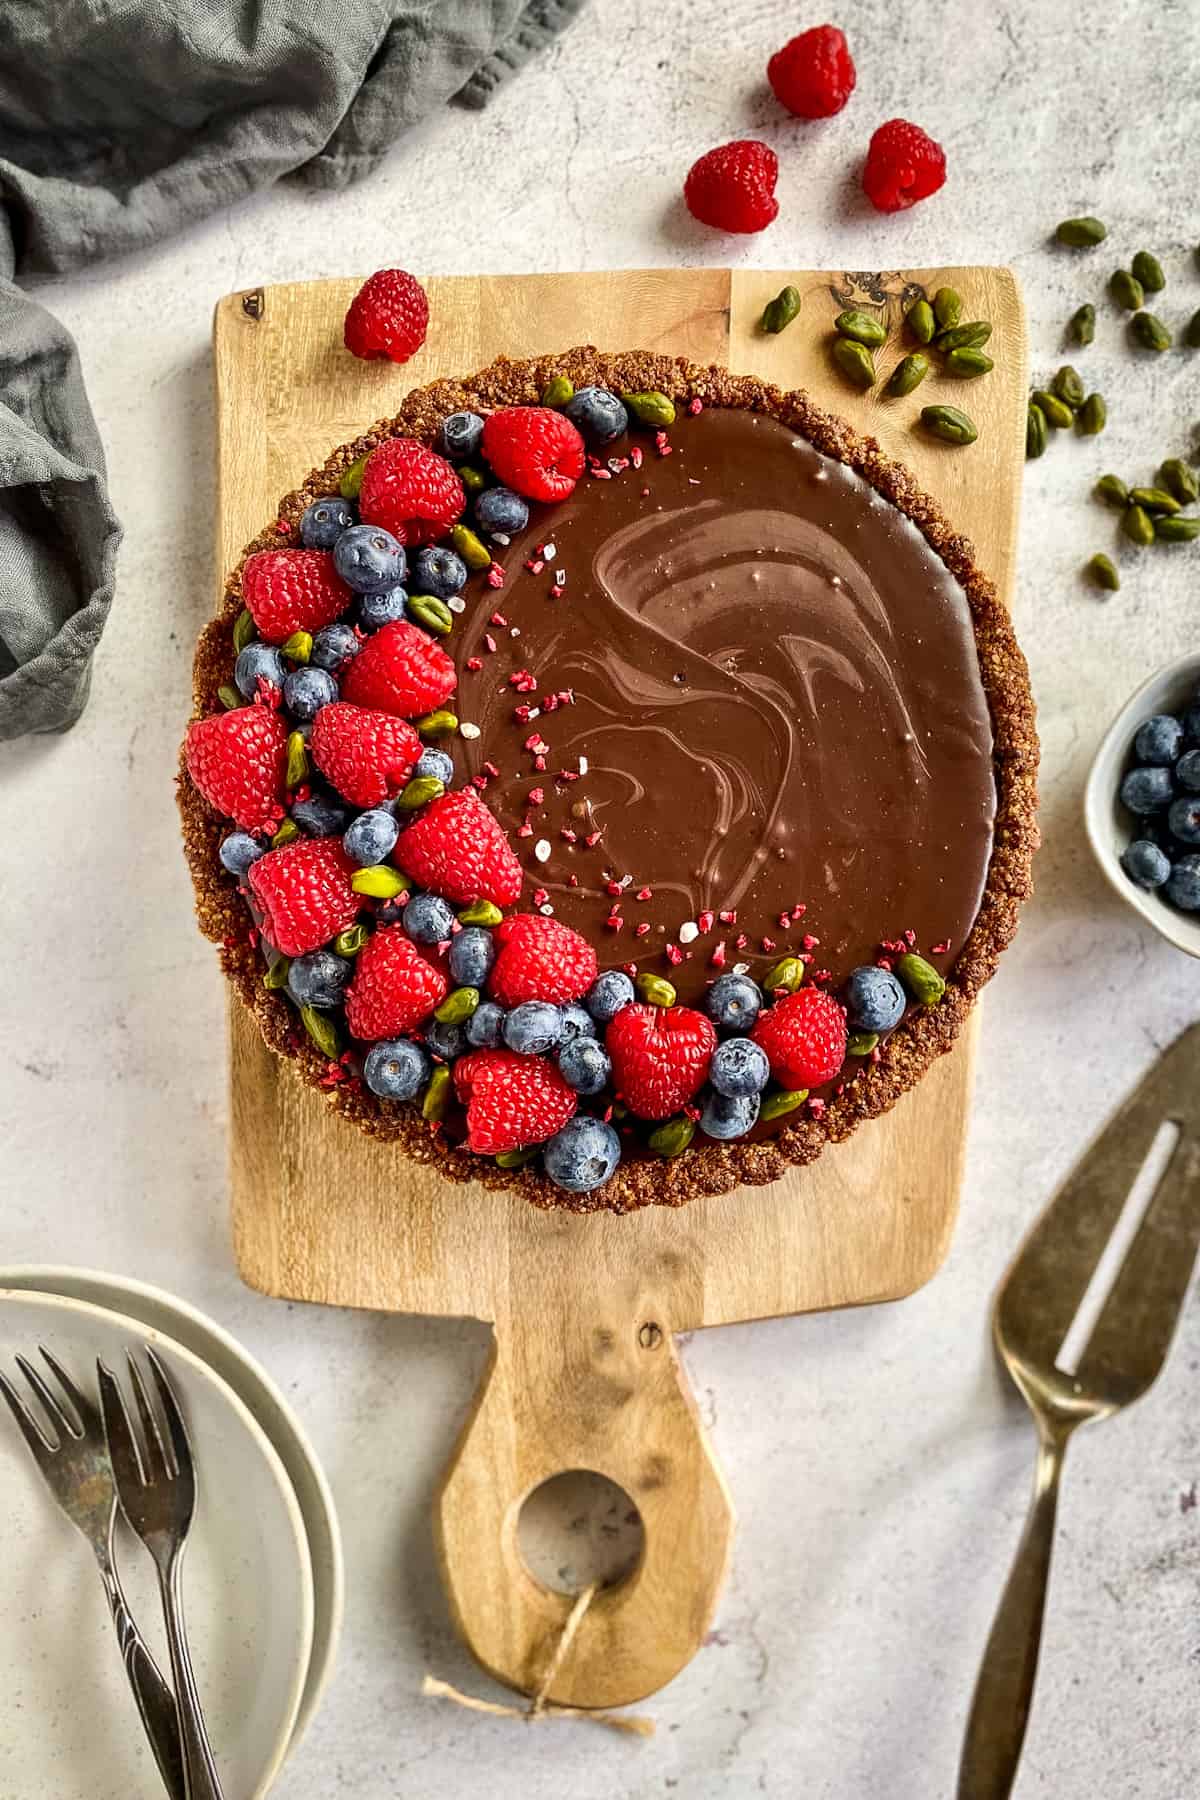 Chocolate tart on a cutting board and topped with raspberries, blueberries, and pistachios.